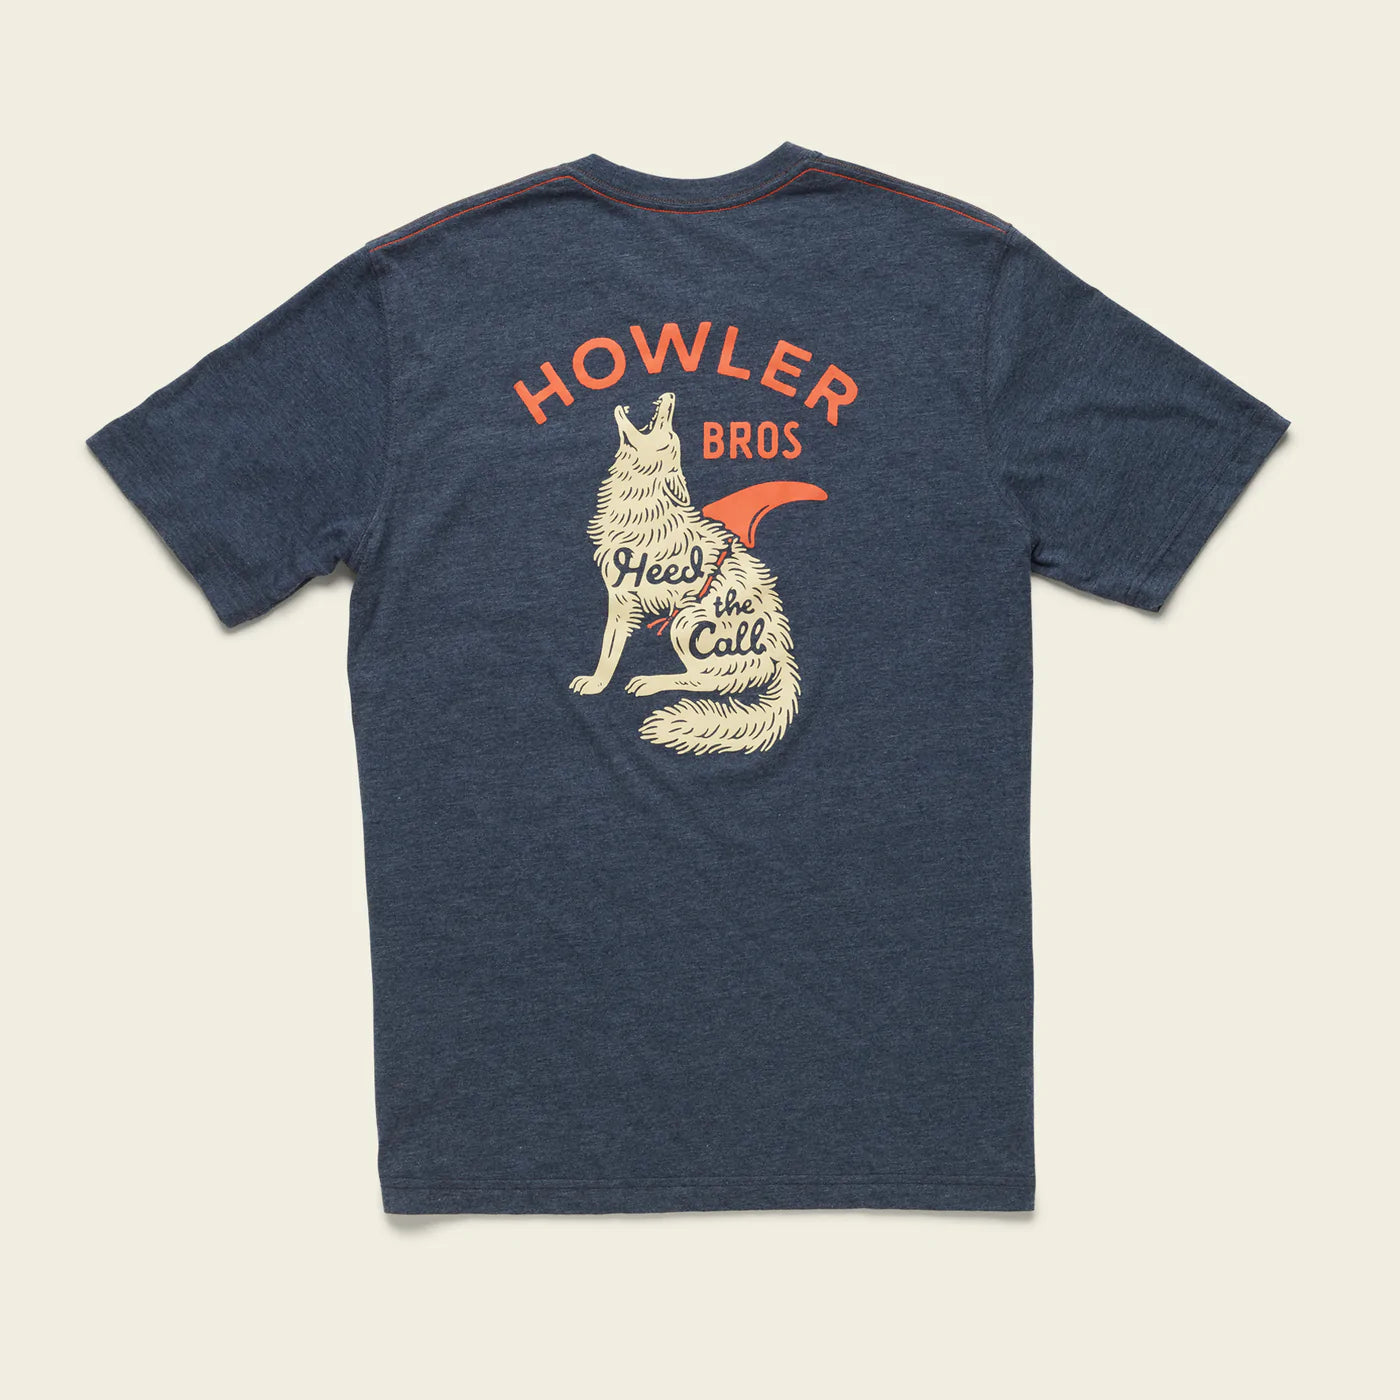 Select T Pocket Tee - Howler Coyote : Navy Heather